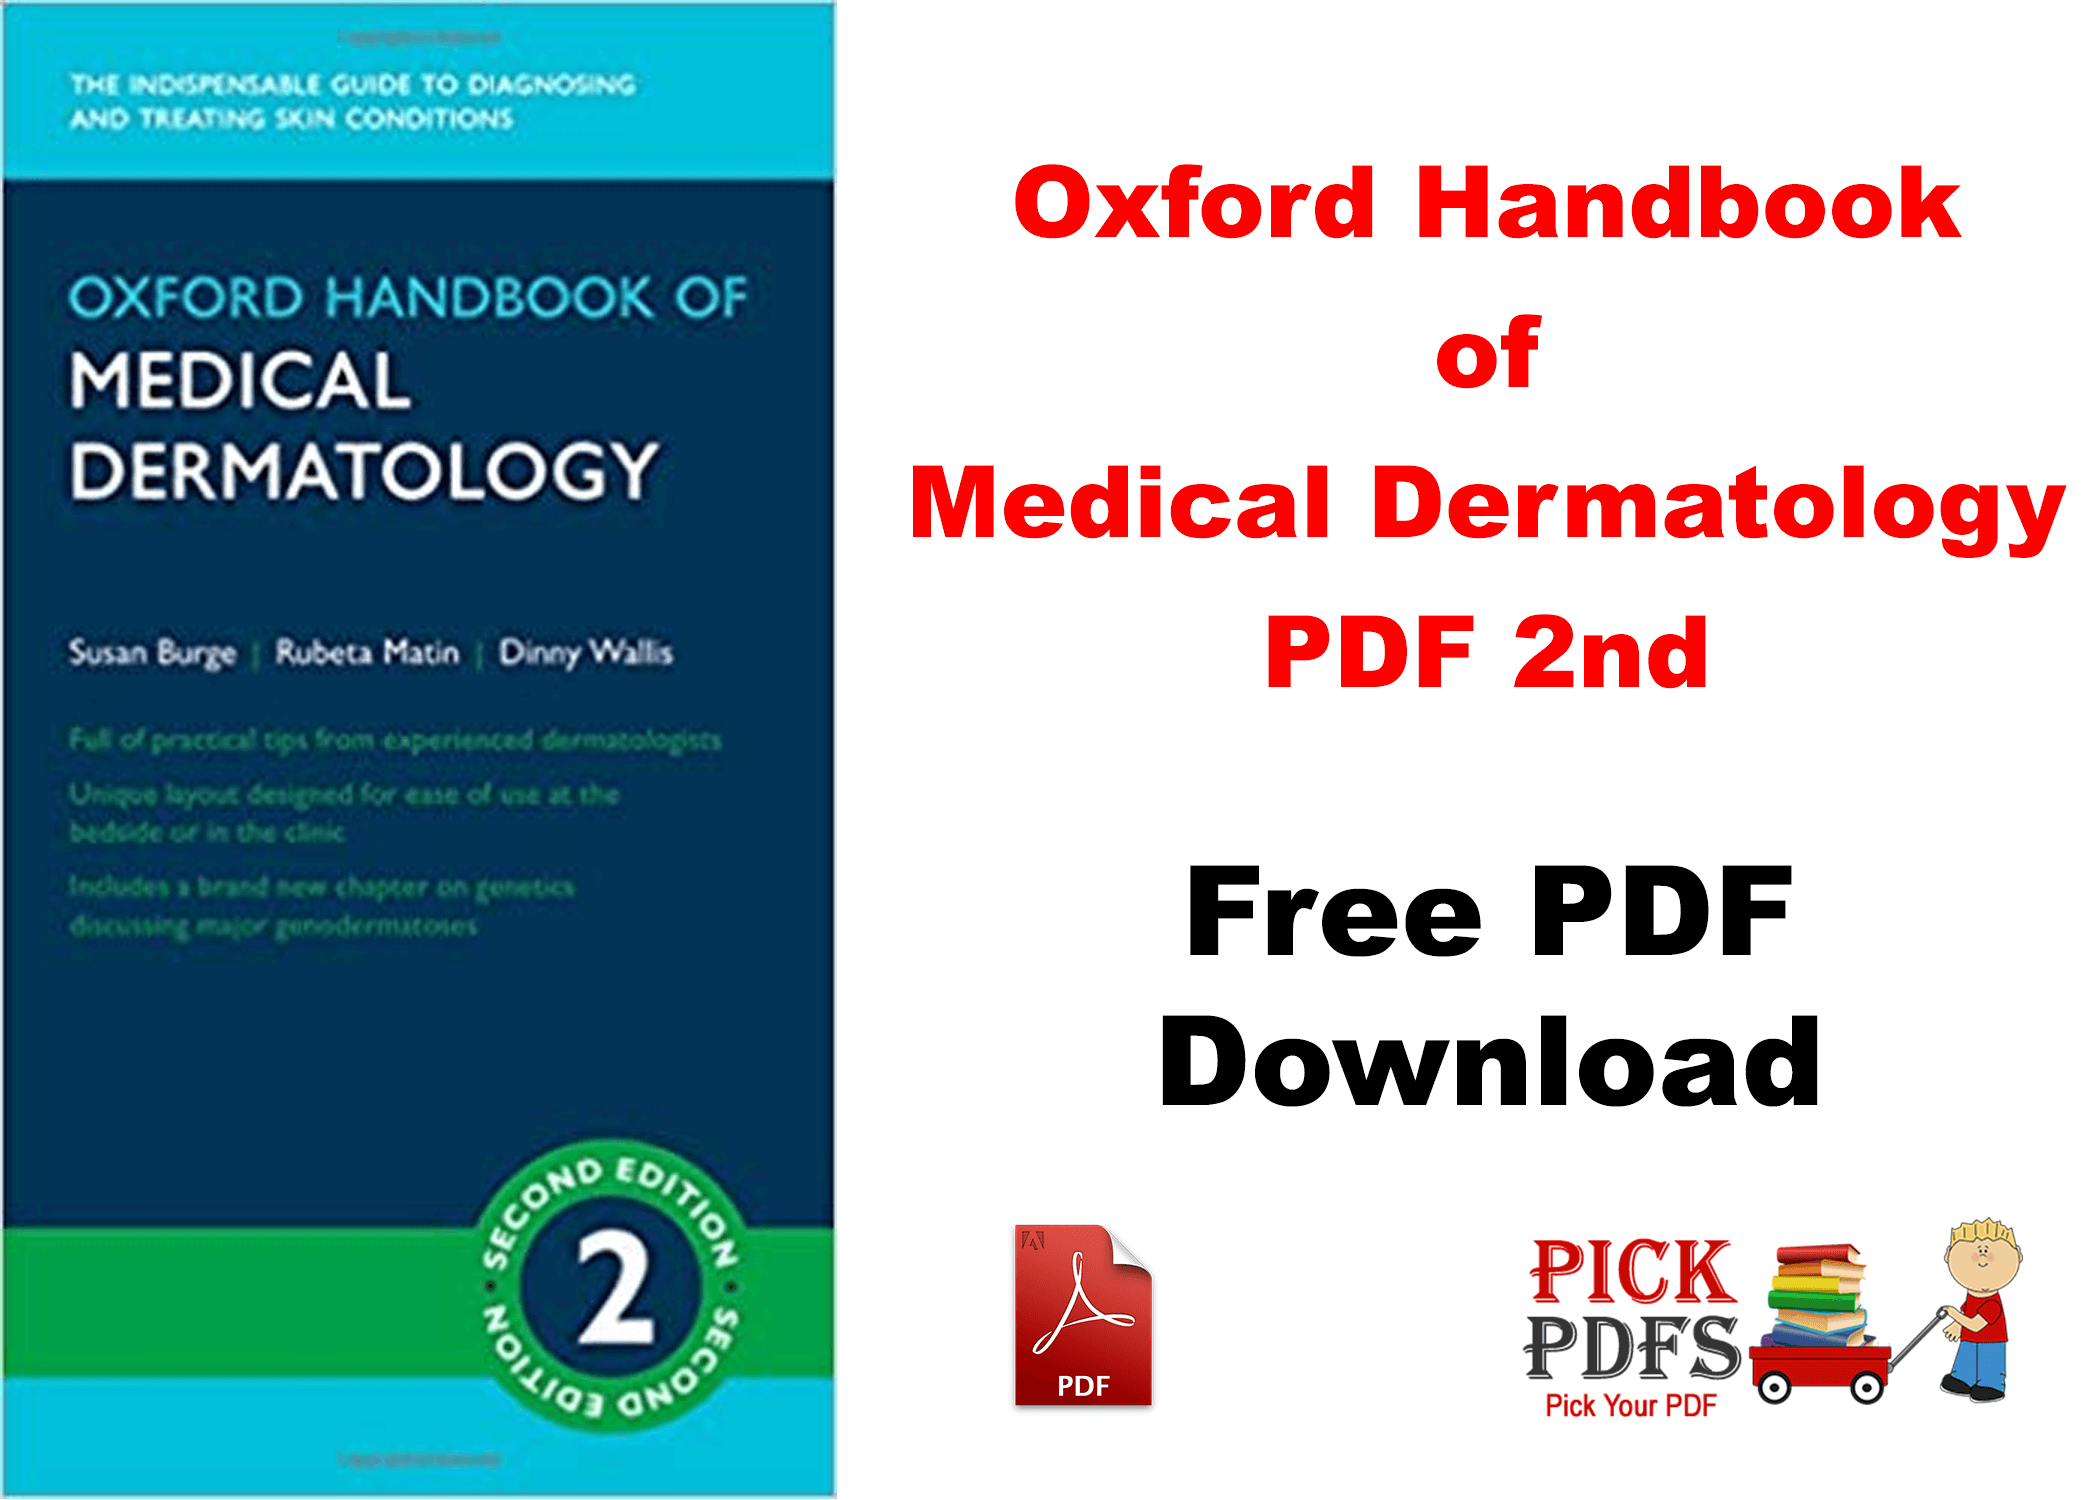 https://pickpdfs.com/basic-sciences-for-core-medical-training-and-the-mrcp-pdf-downloaddirect-links/